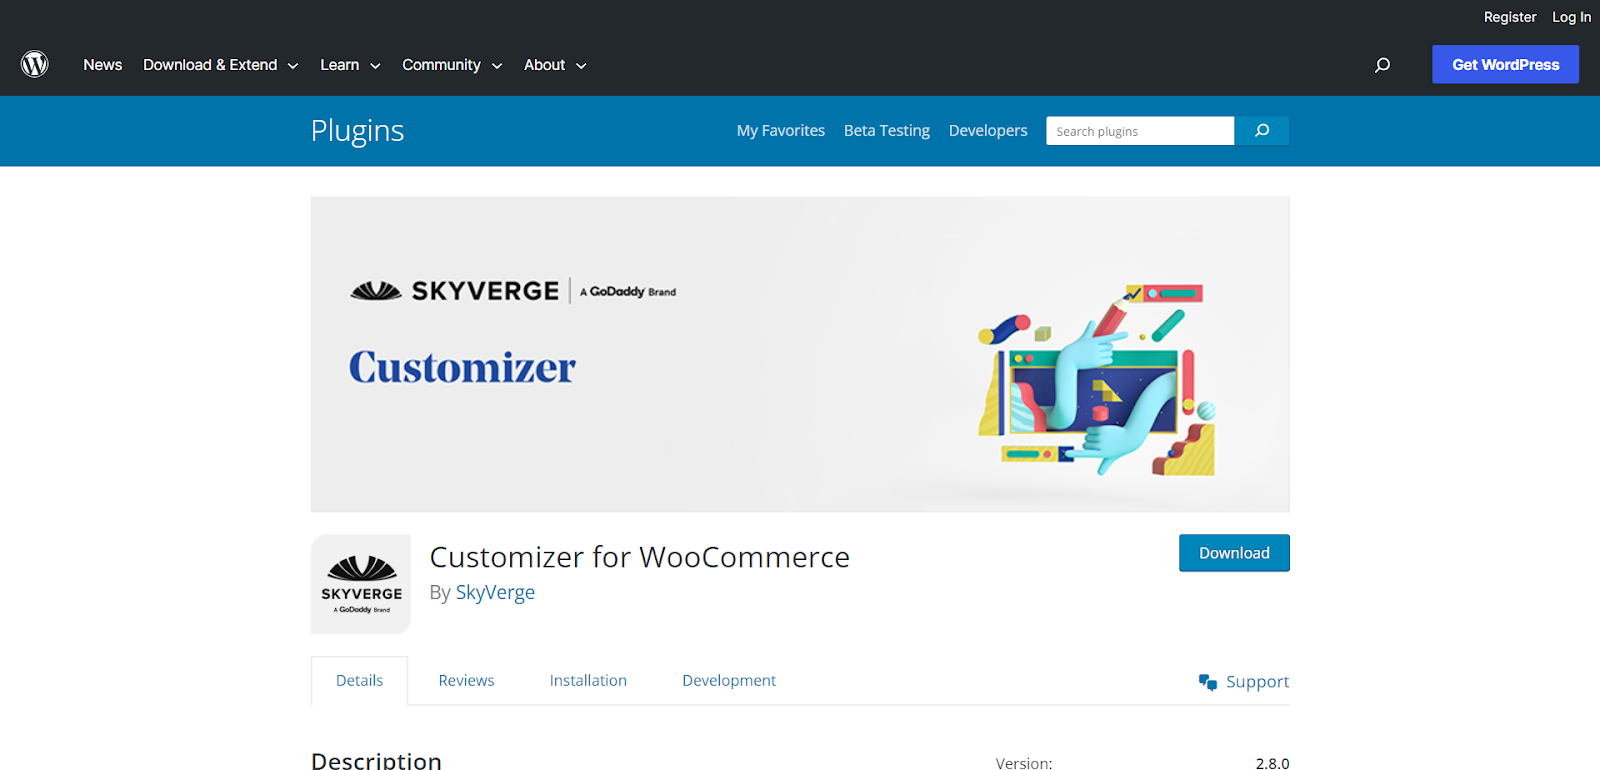 Customizer for WooCommerce 